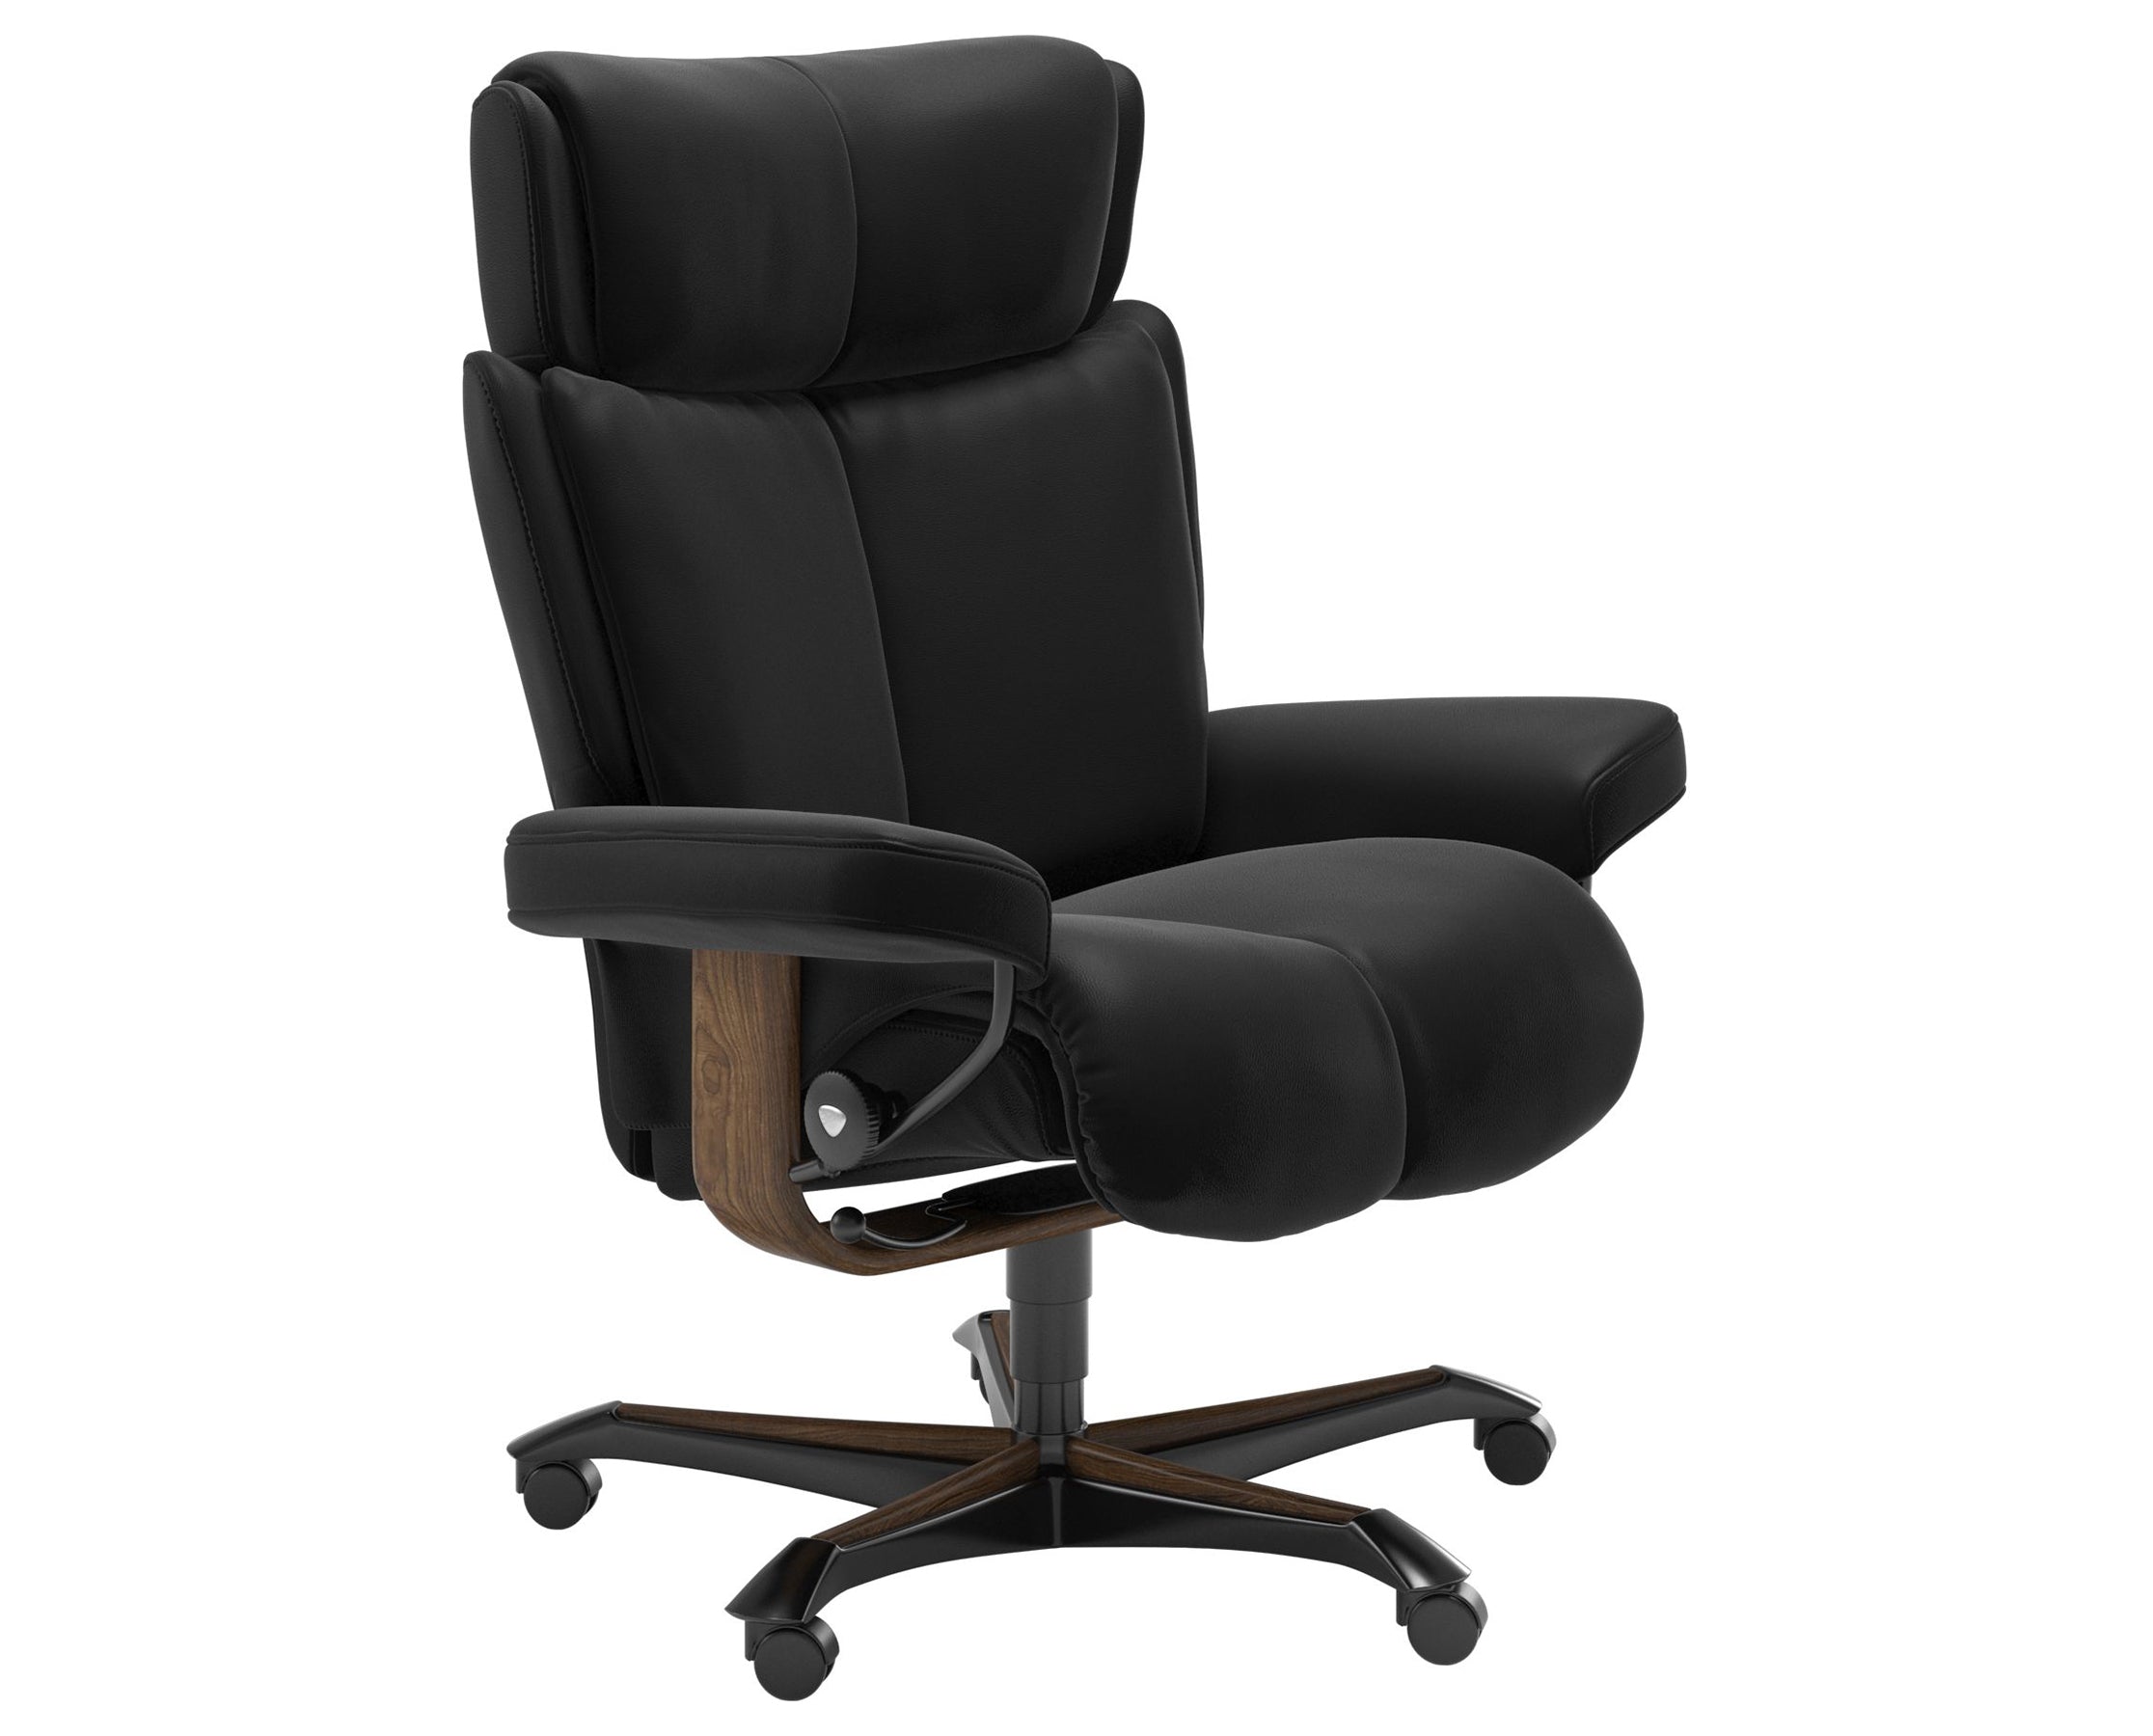 Paloma Leather Black M and Teak Base | Stressless Magic Home Office Chair | Valley Ridge Furniture